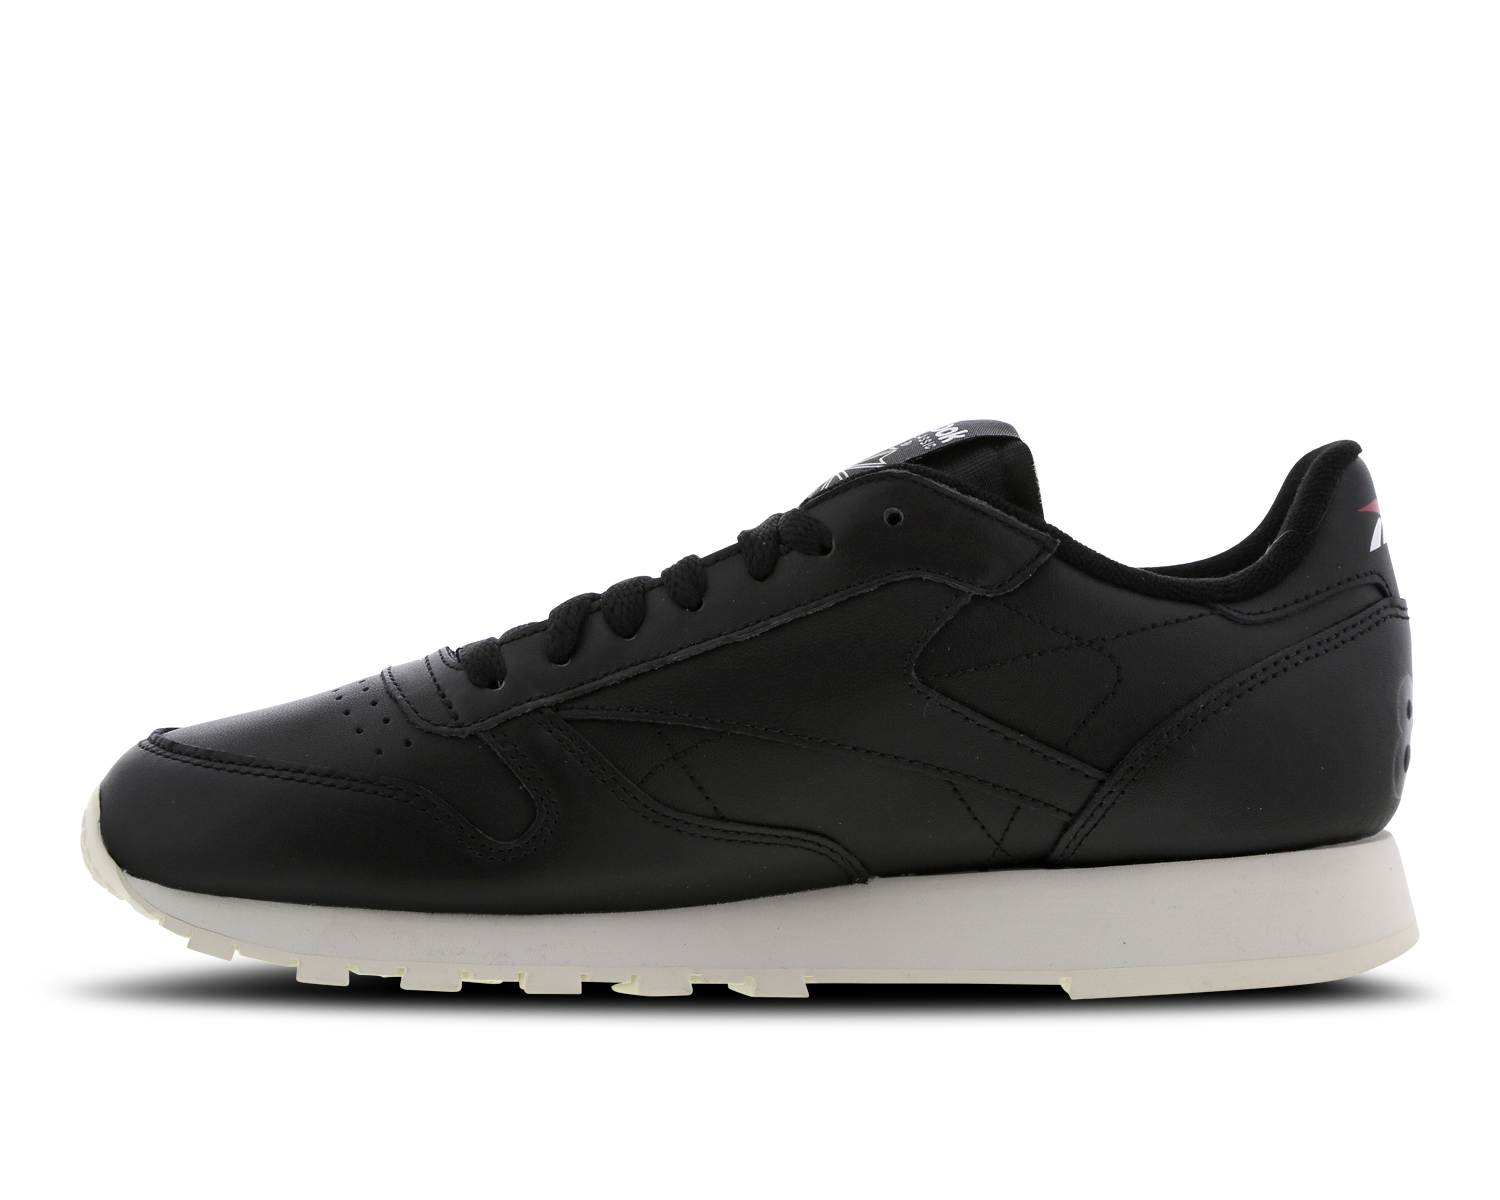 Reebok Classic Leather Alter The Icon @ Footlocker